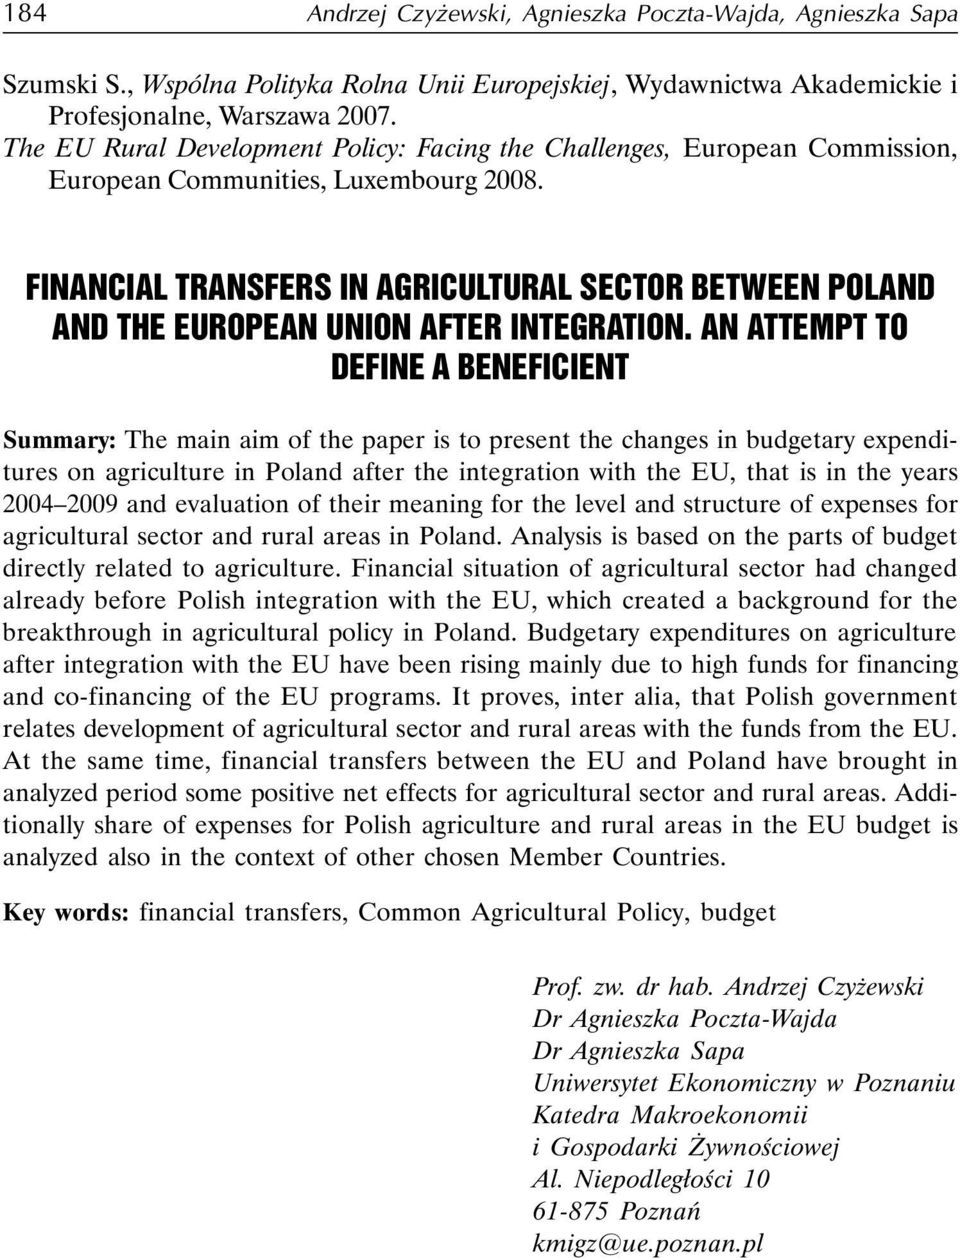 FINANCIAL TRANSFERS IN AGRICULTURAL SECTOR BETWEEN POLAND AND THE EUROPEAN UNION AFTER INTEGRATION.